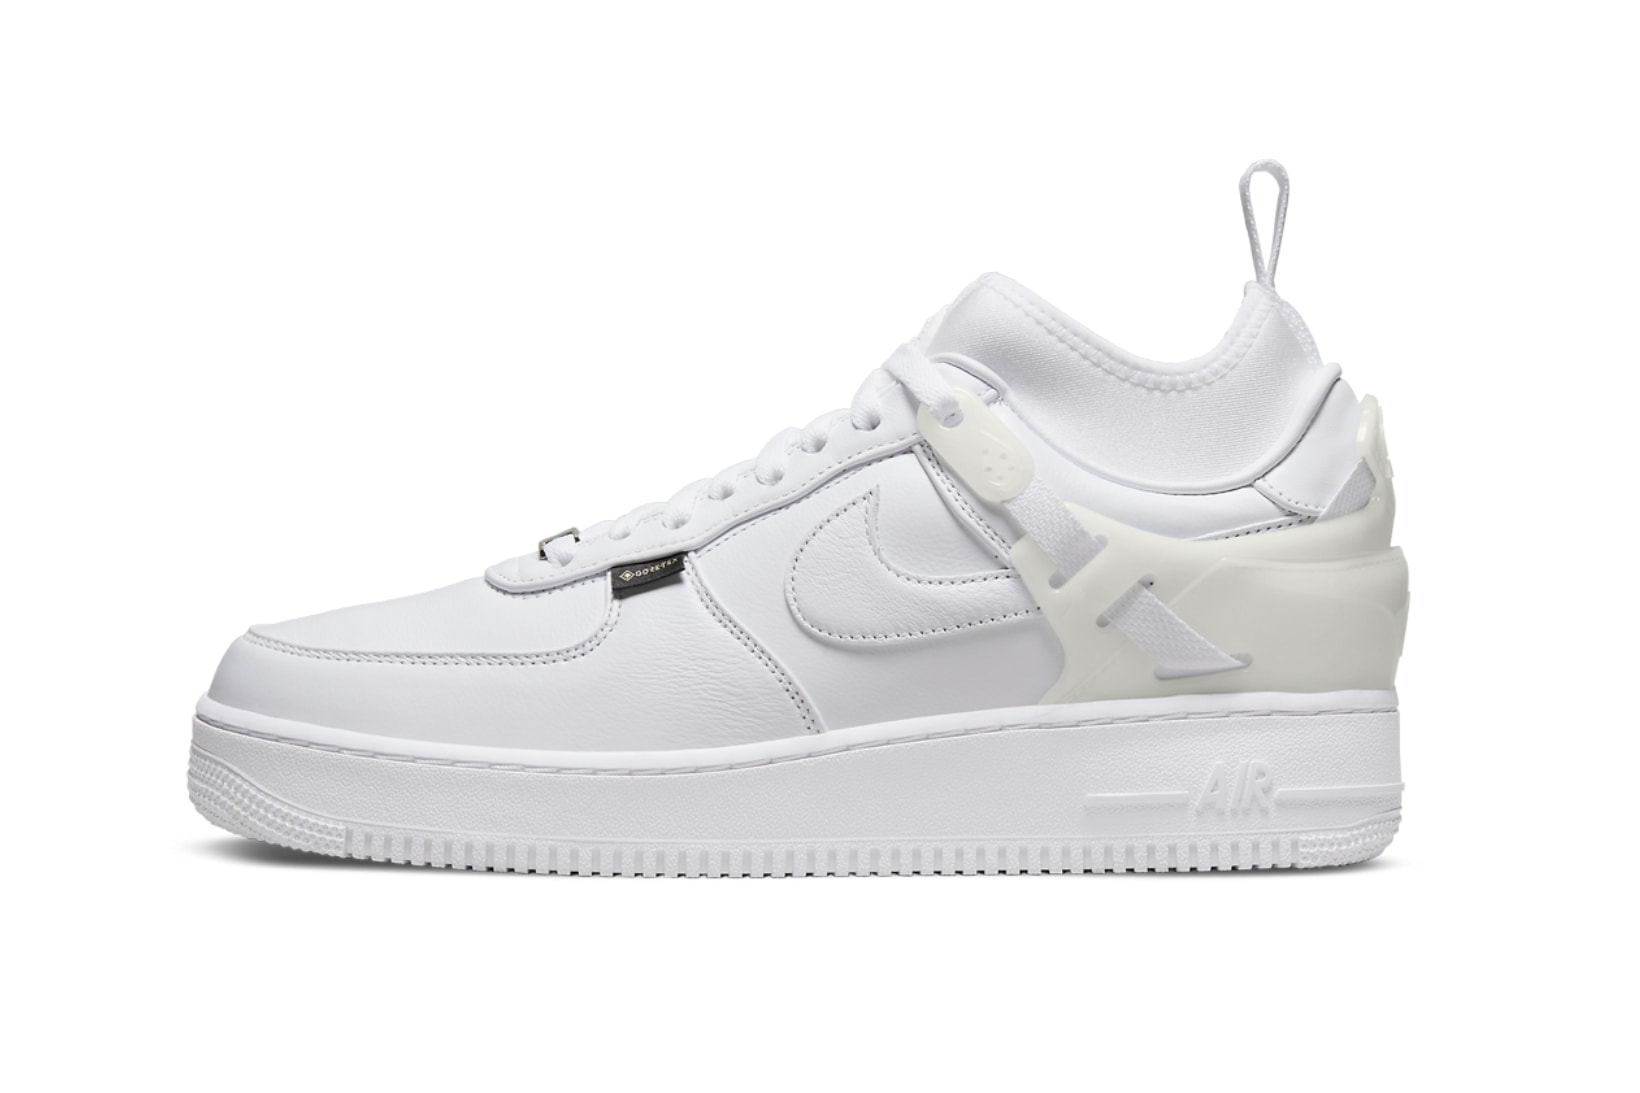 Undercover x Nike Air Force 1 Low Collab Release